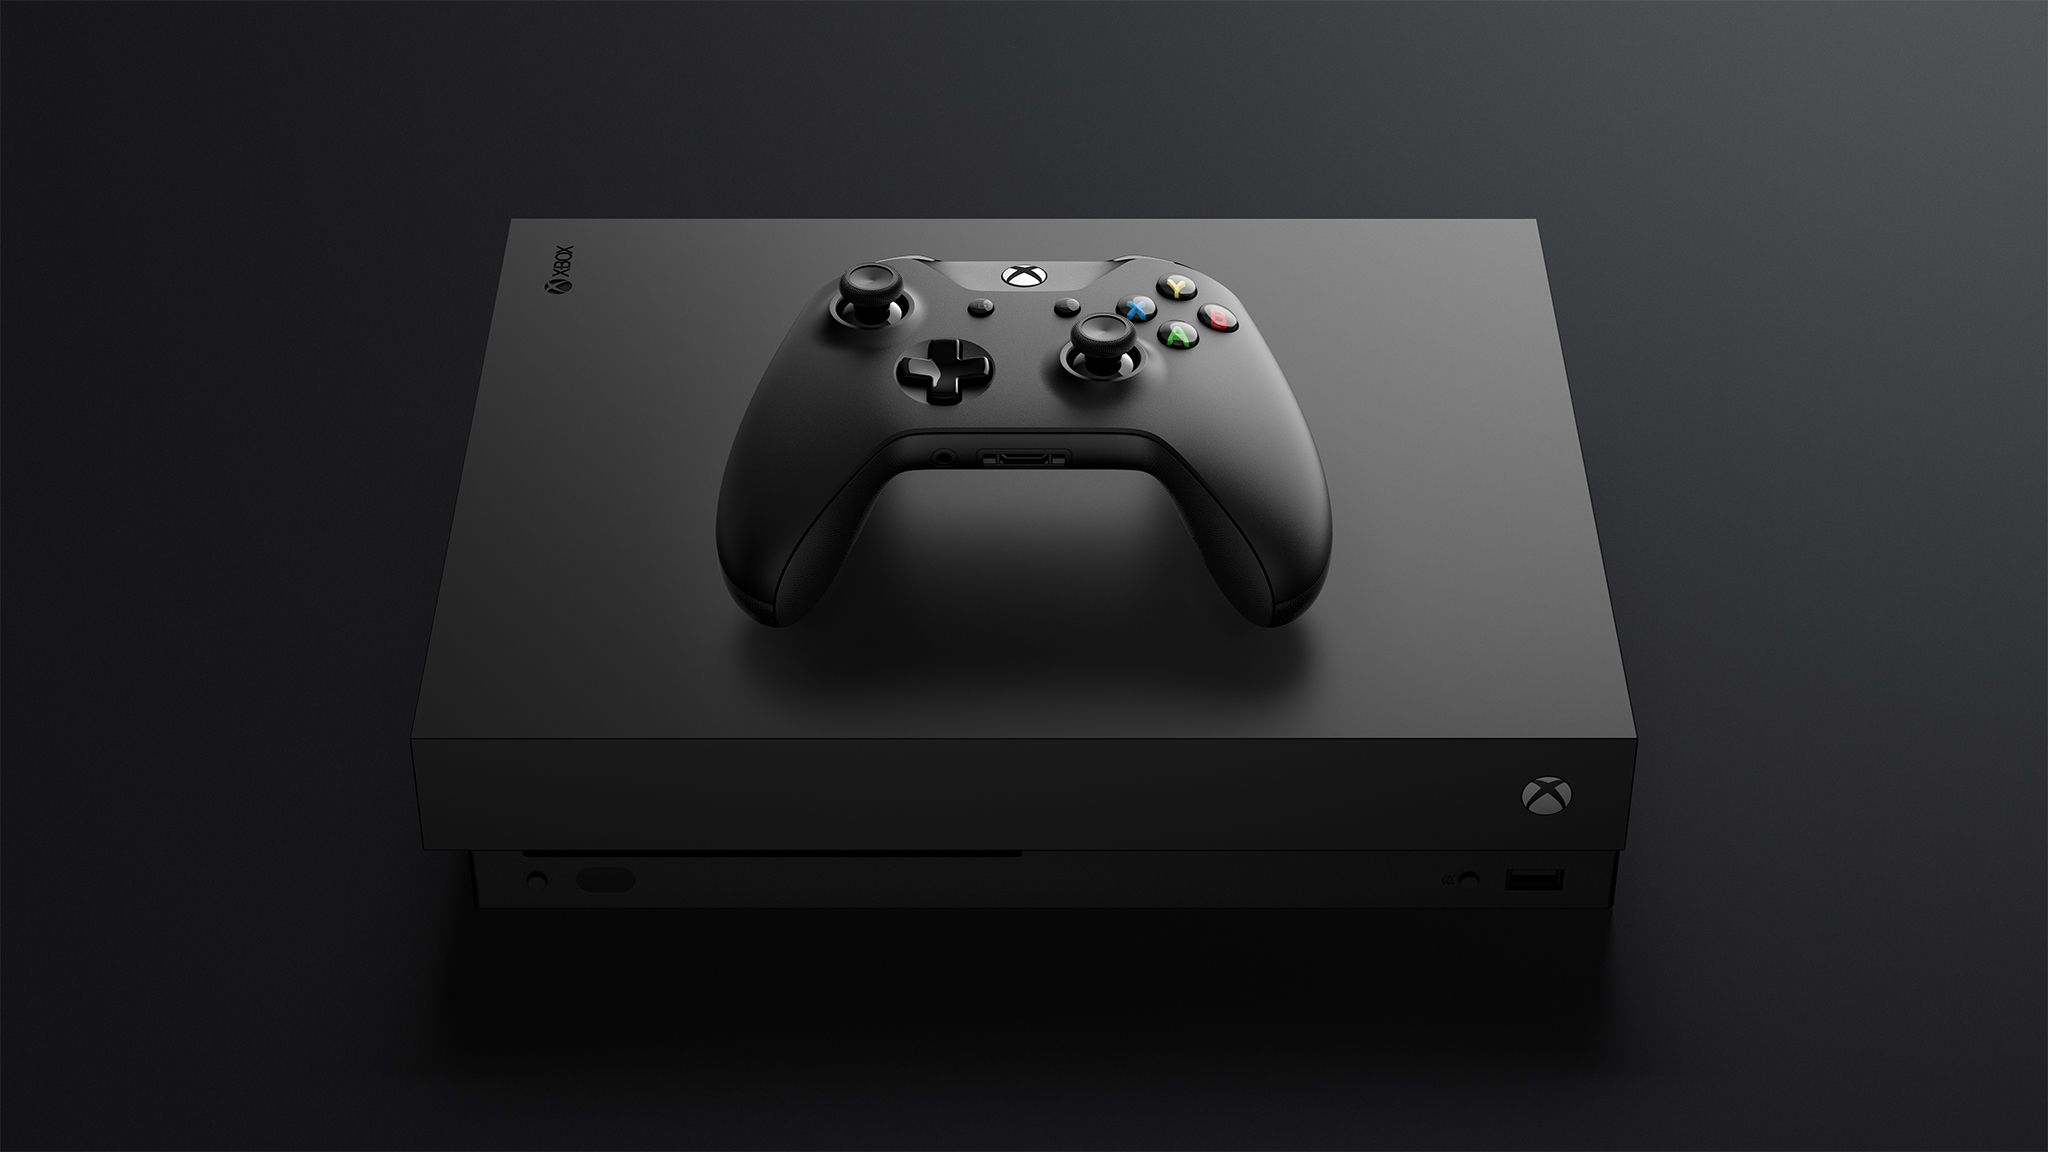 An Xbox One X Update Is Coming To Fix Current Blu-ray Issue